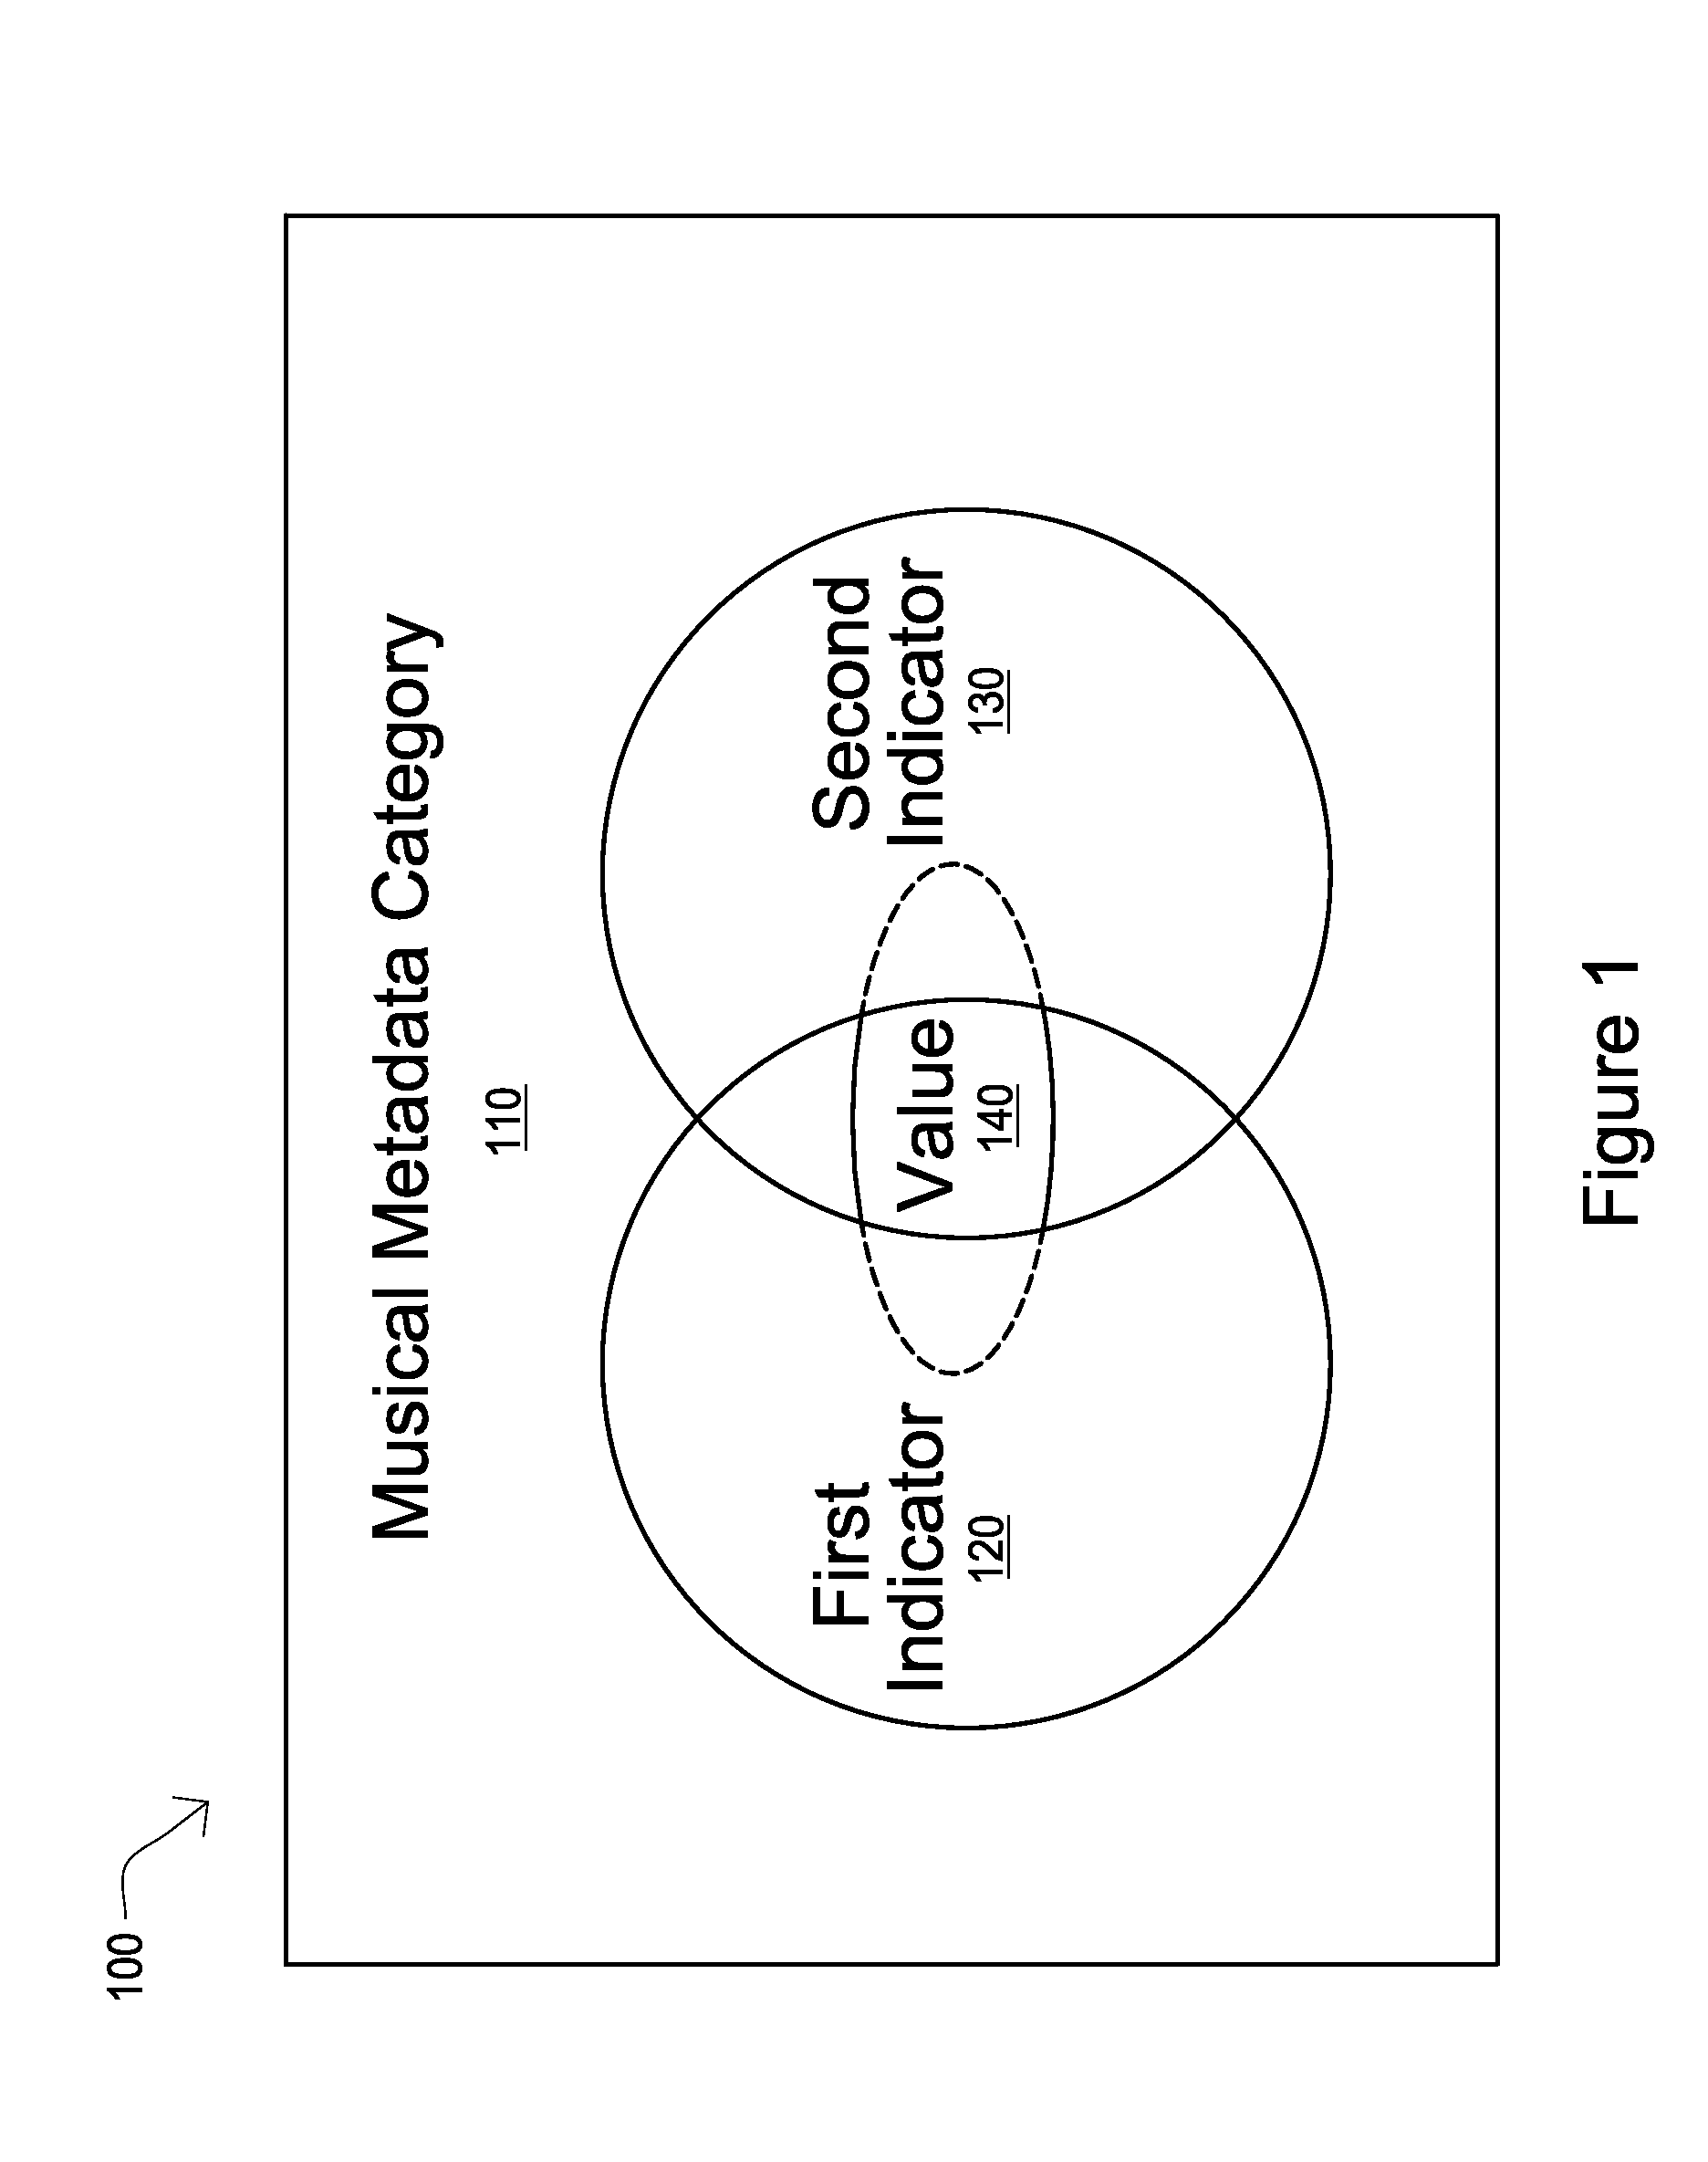 Music composition system and method